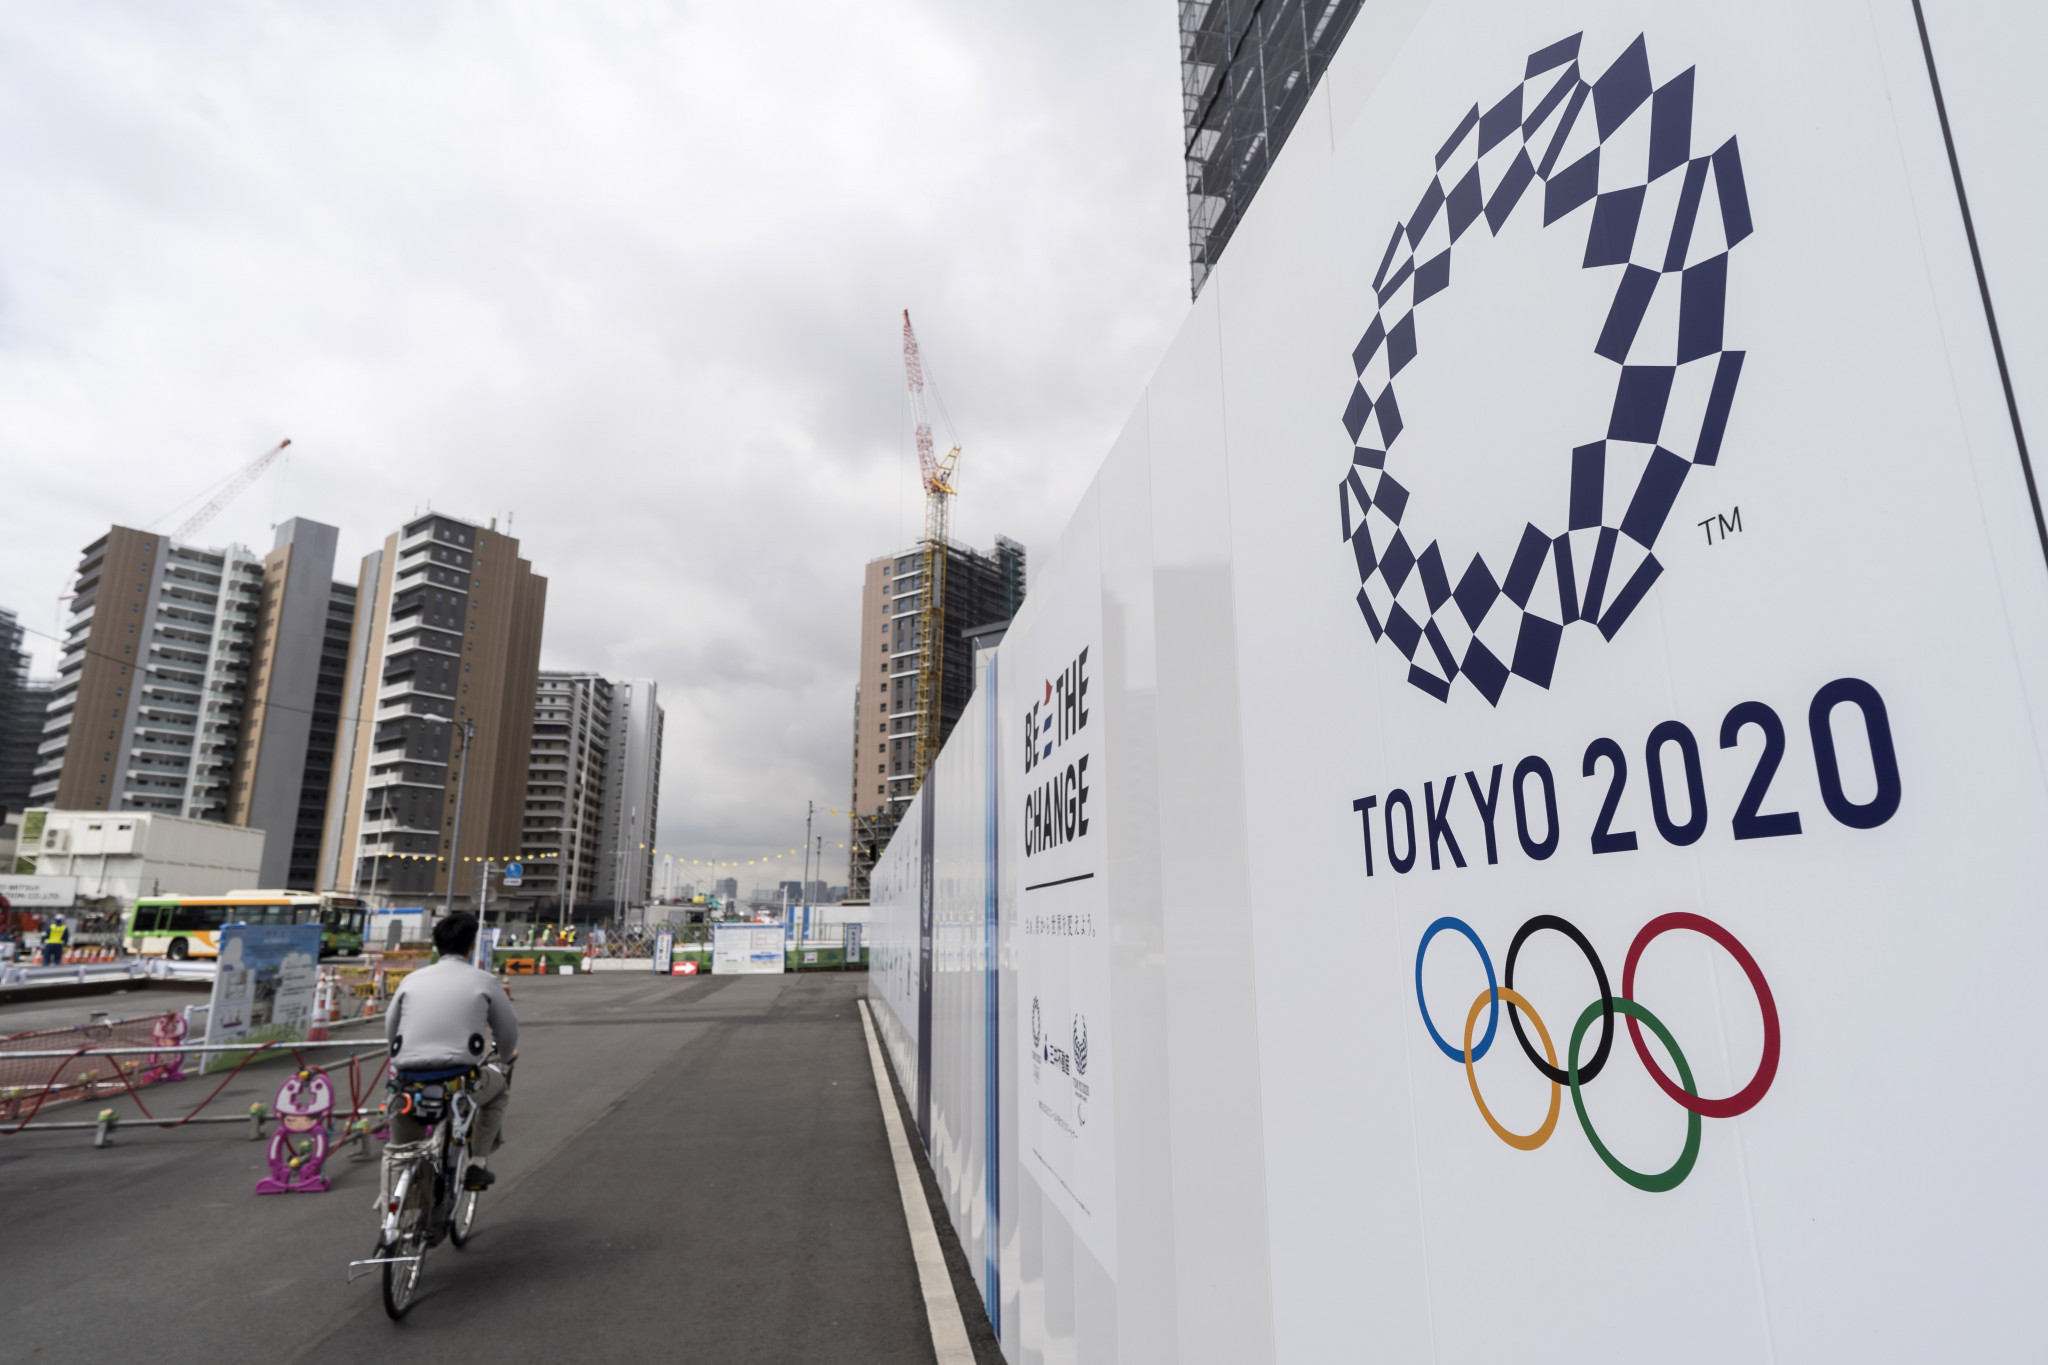 Sky and TVNZ form partnership to screen Tokyo 2020